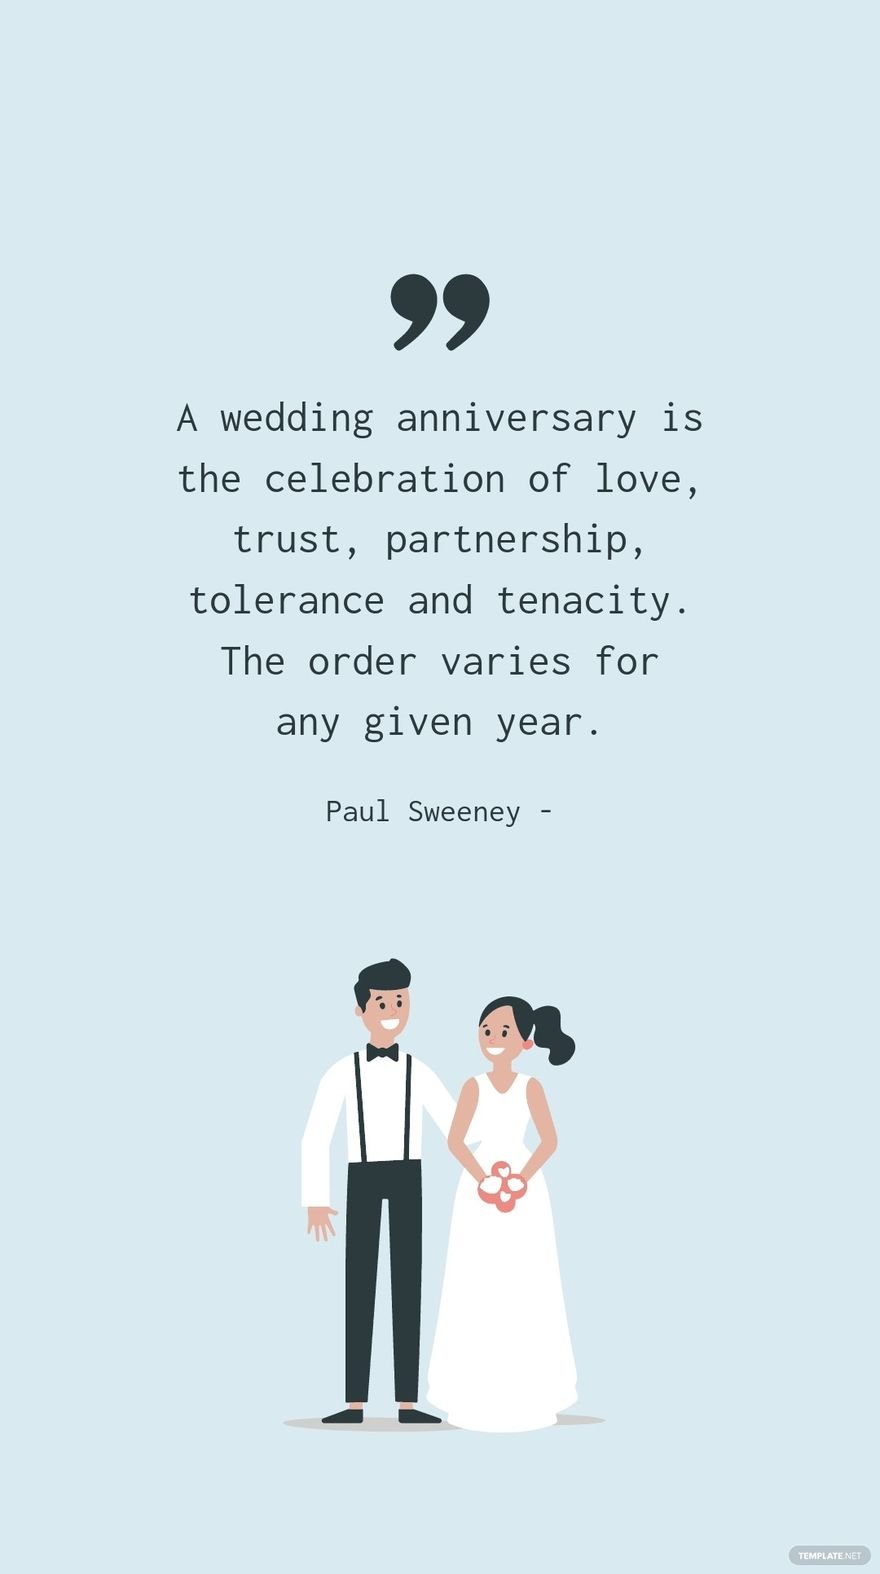 Paul Sweeney - A wedding anniversary is the celebration of love, trust, partnership, tolerance and tenacity. The order varies for any given year. in JPG